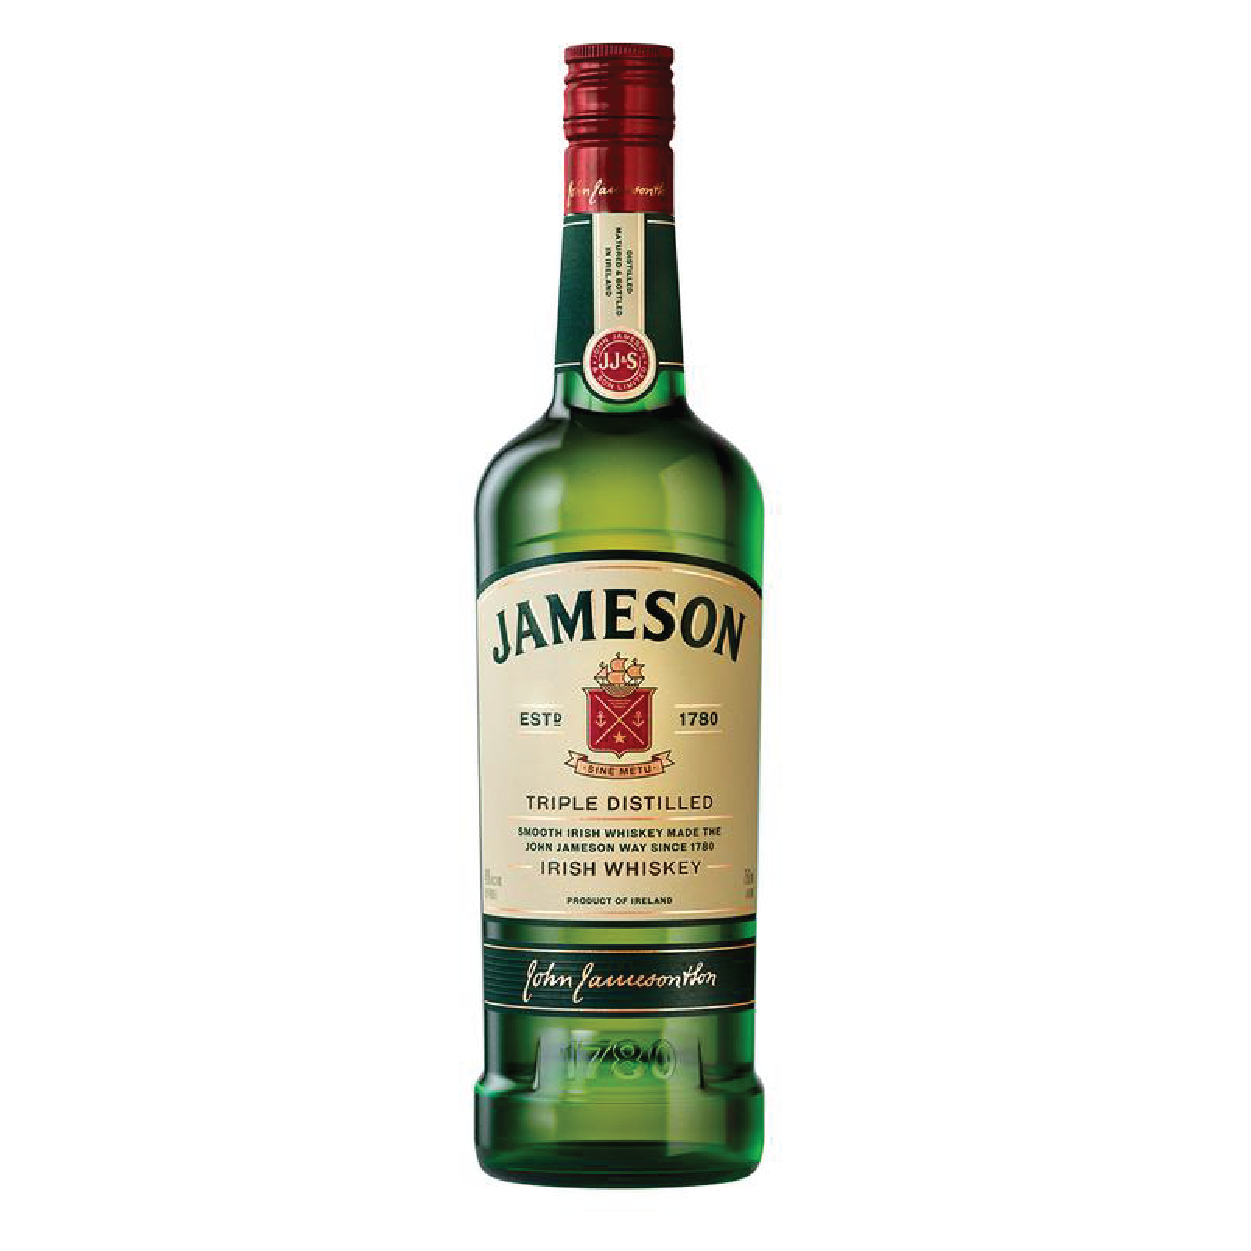 Send a Custom Jameson Bottle with Personalized Label